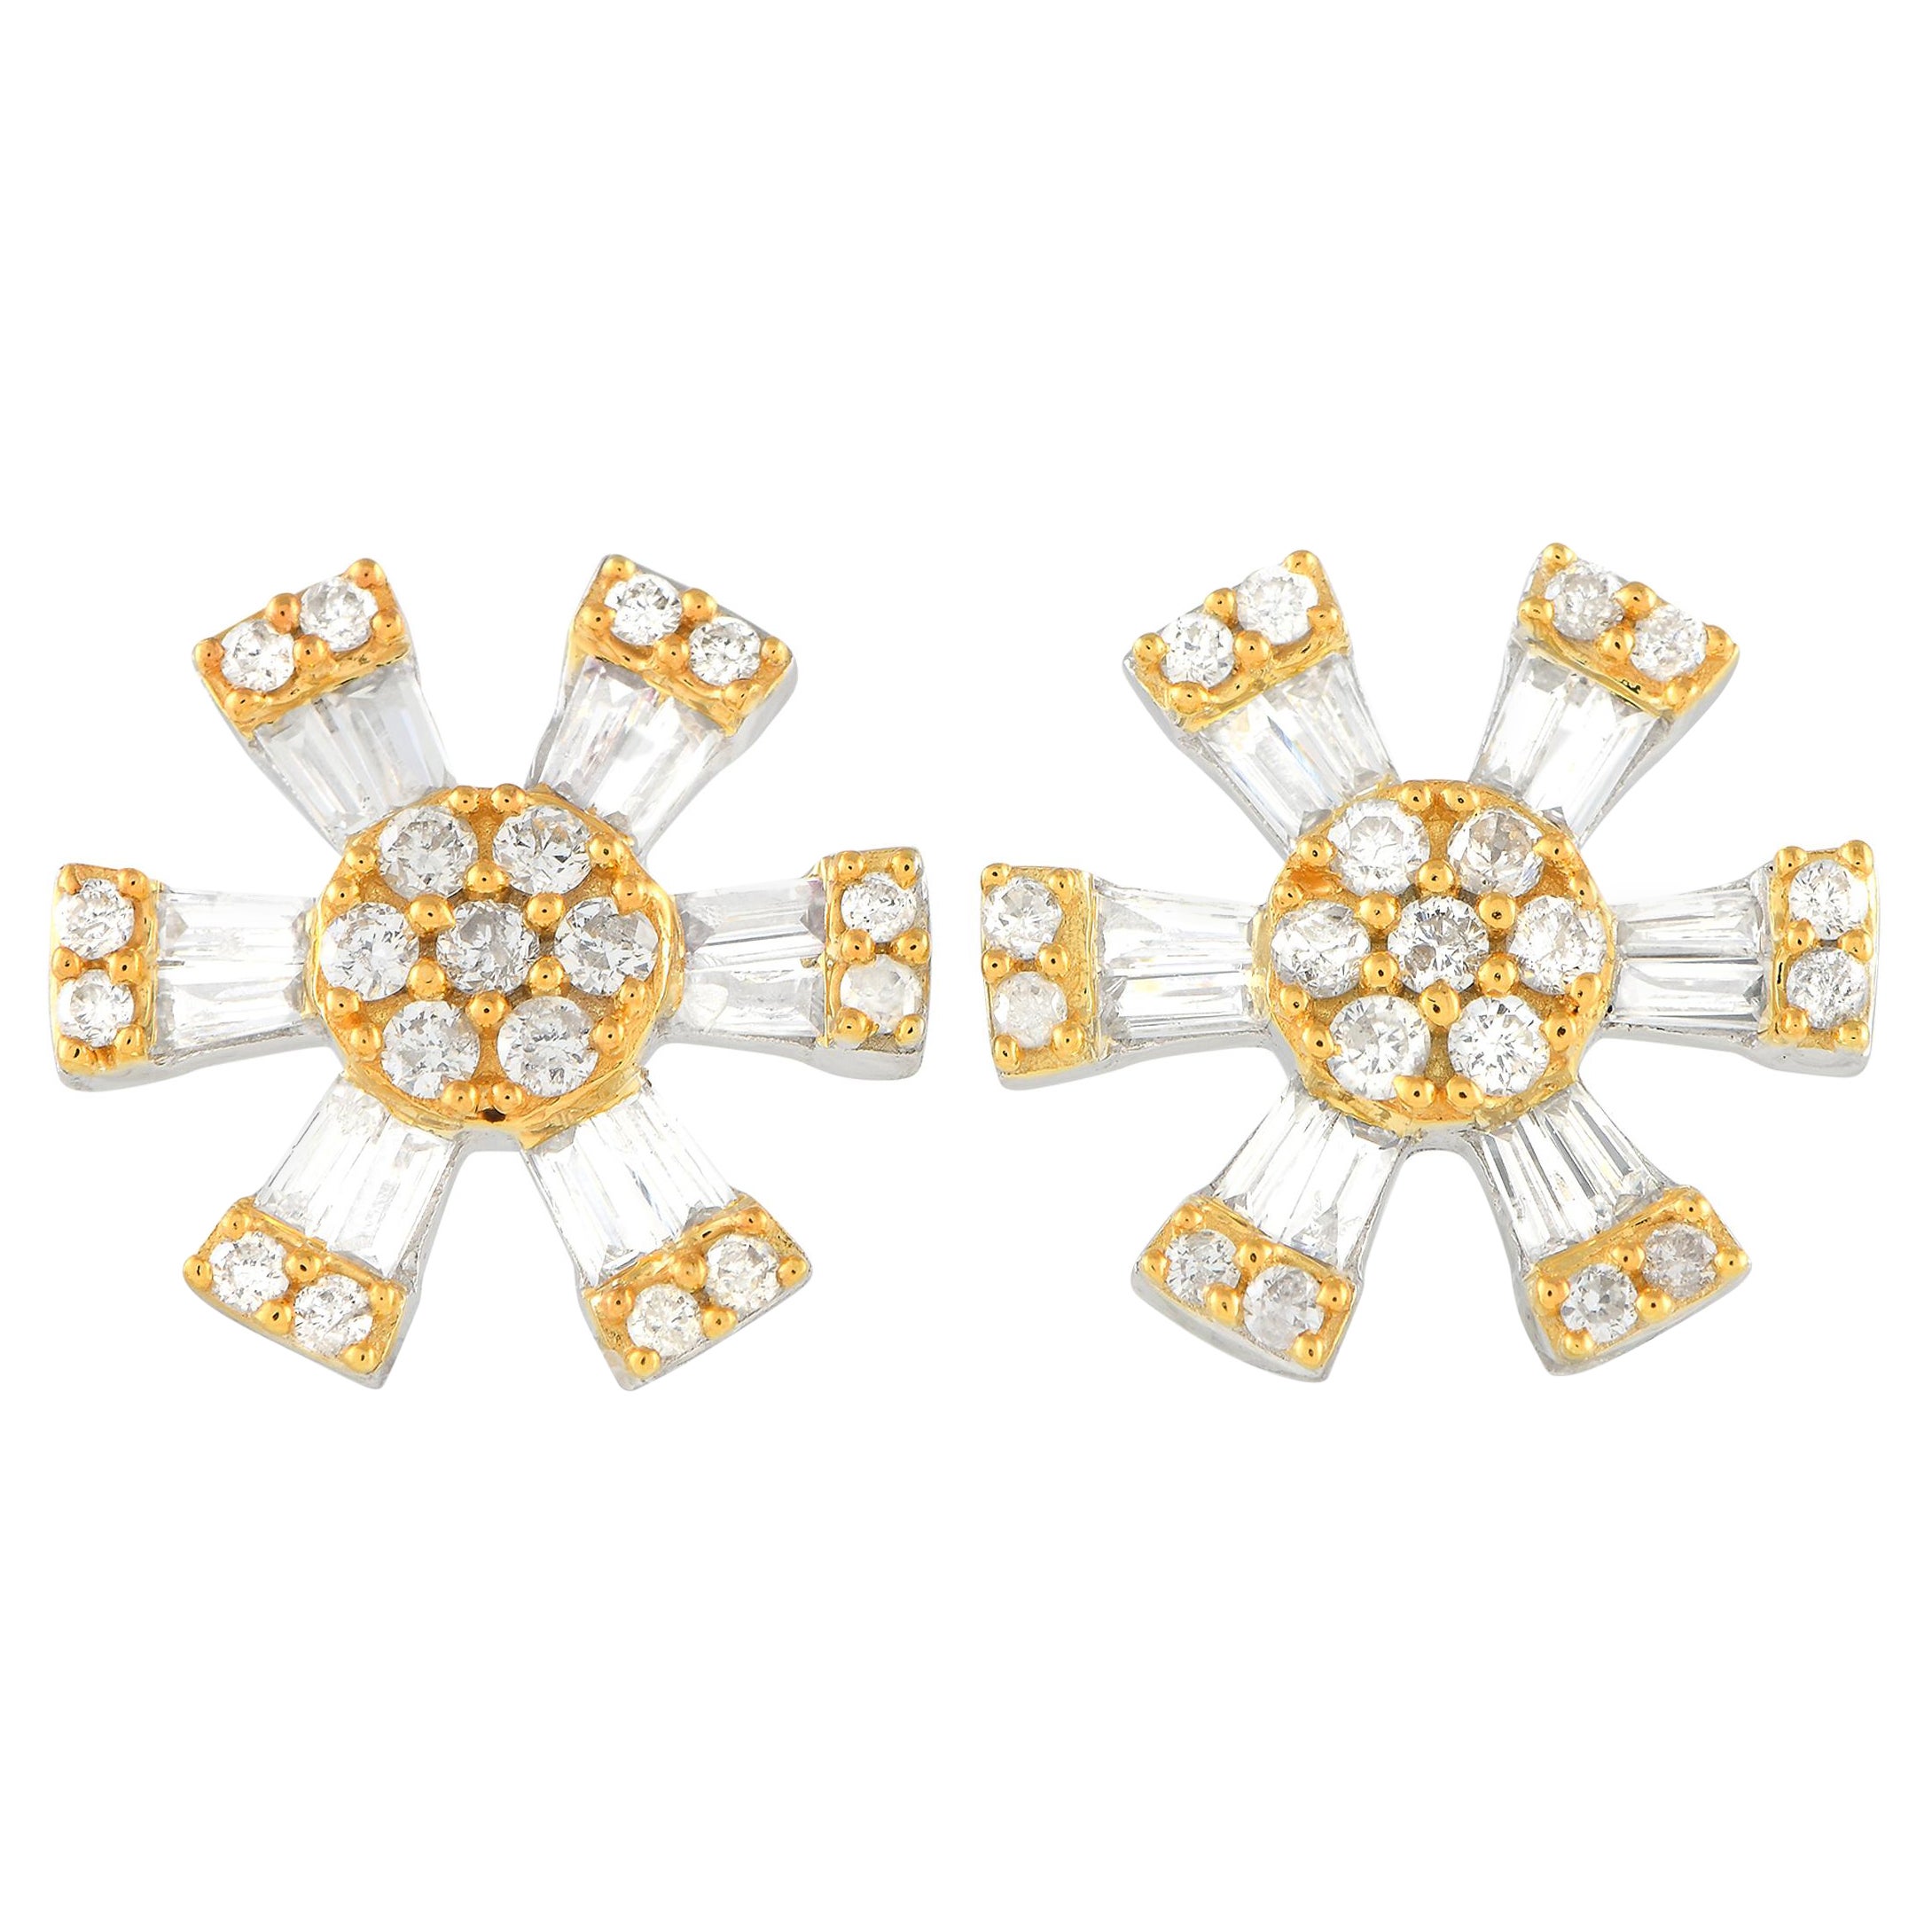 LB Exclusive 14K White and Yellow Gold 0.43ct Diamond Earrings For Sale